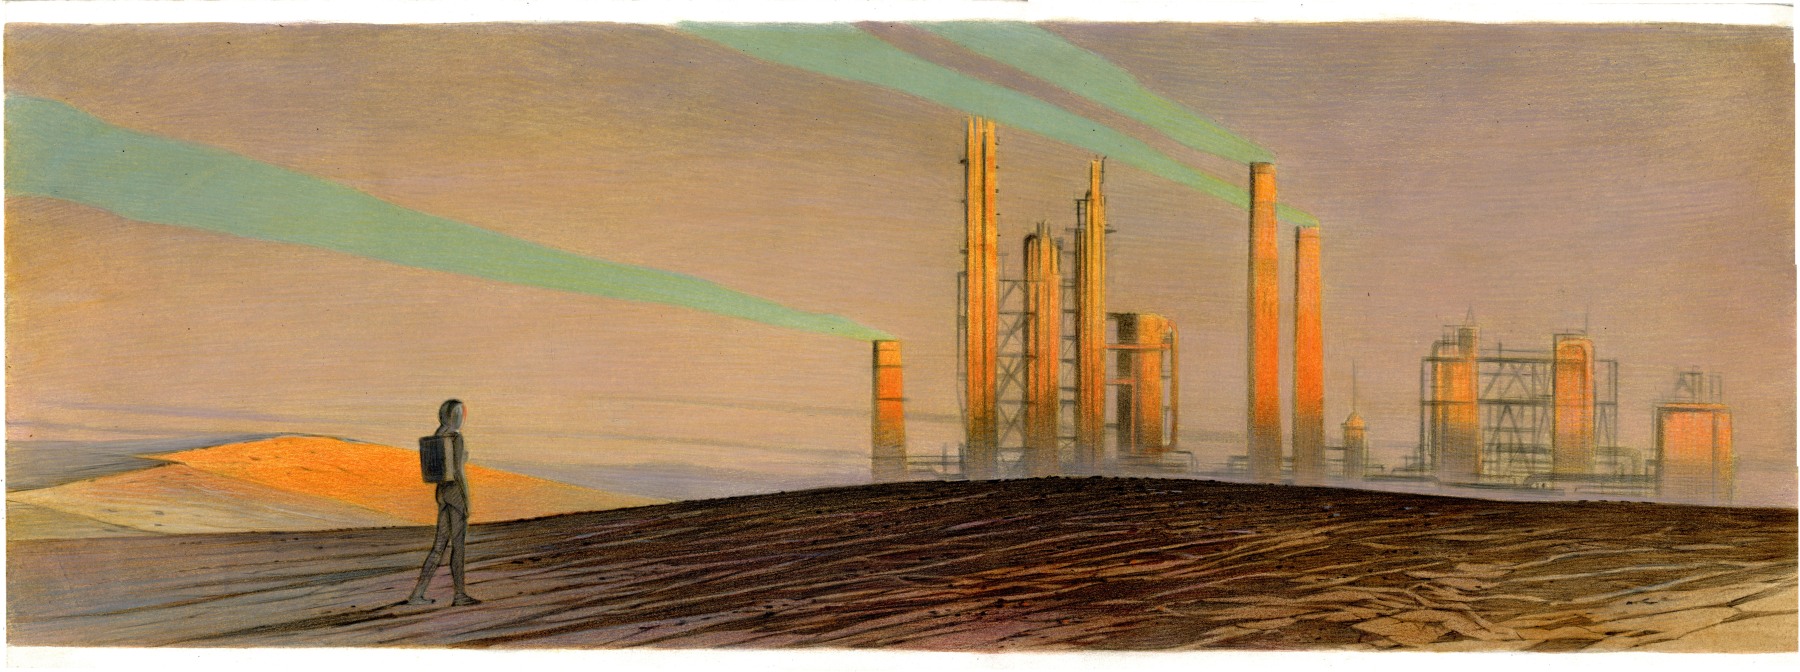 Fran&amp;ccedil;ois Schuiten

Night 160 - 3:45 AM, 2021

Acrylic and crayon on Arches Aquarelle paper

Framed: 14 3/8 x 34 inches (36.51 x 86.36 cm)

$15,000